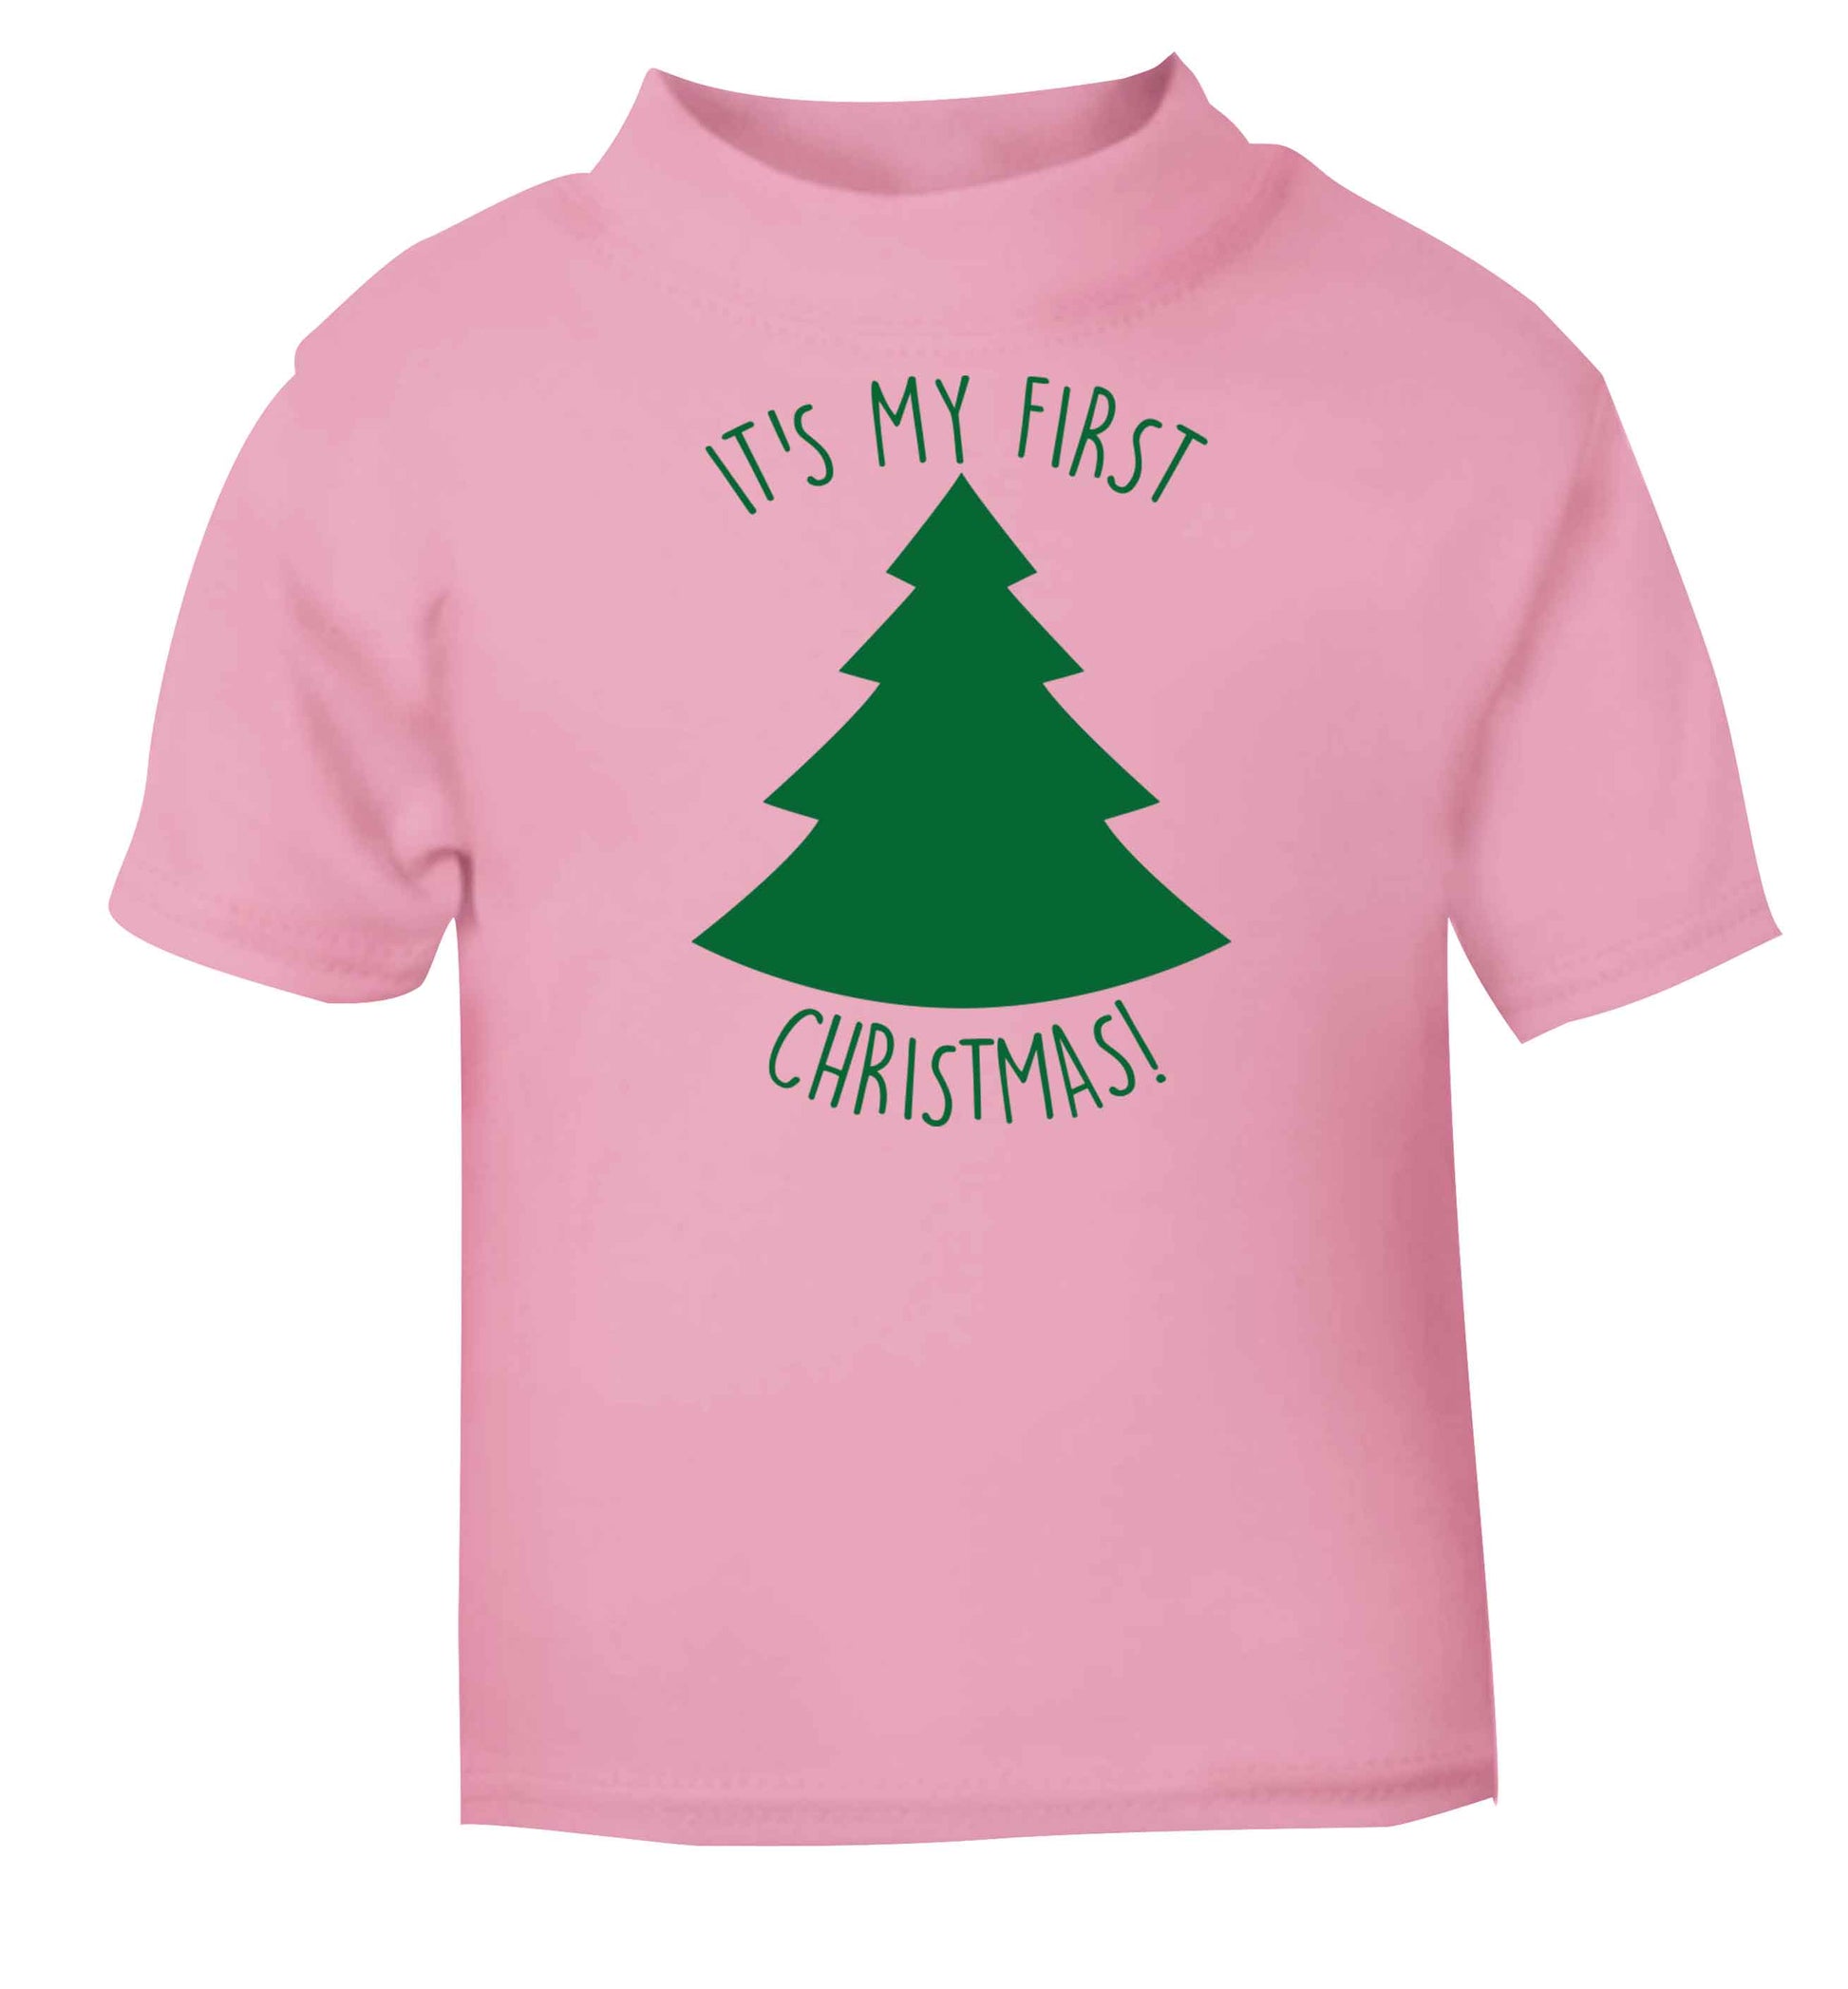 It's my first Christmas - tree light pink baby toddler Tshirt 2 Years